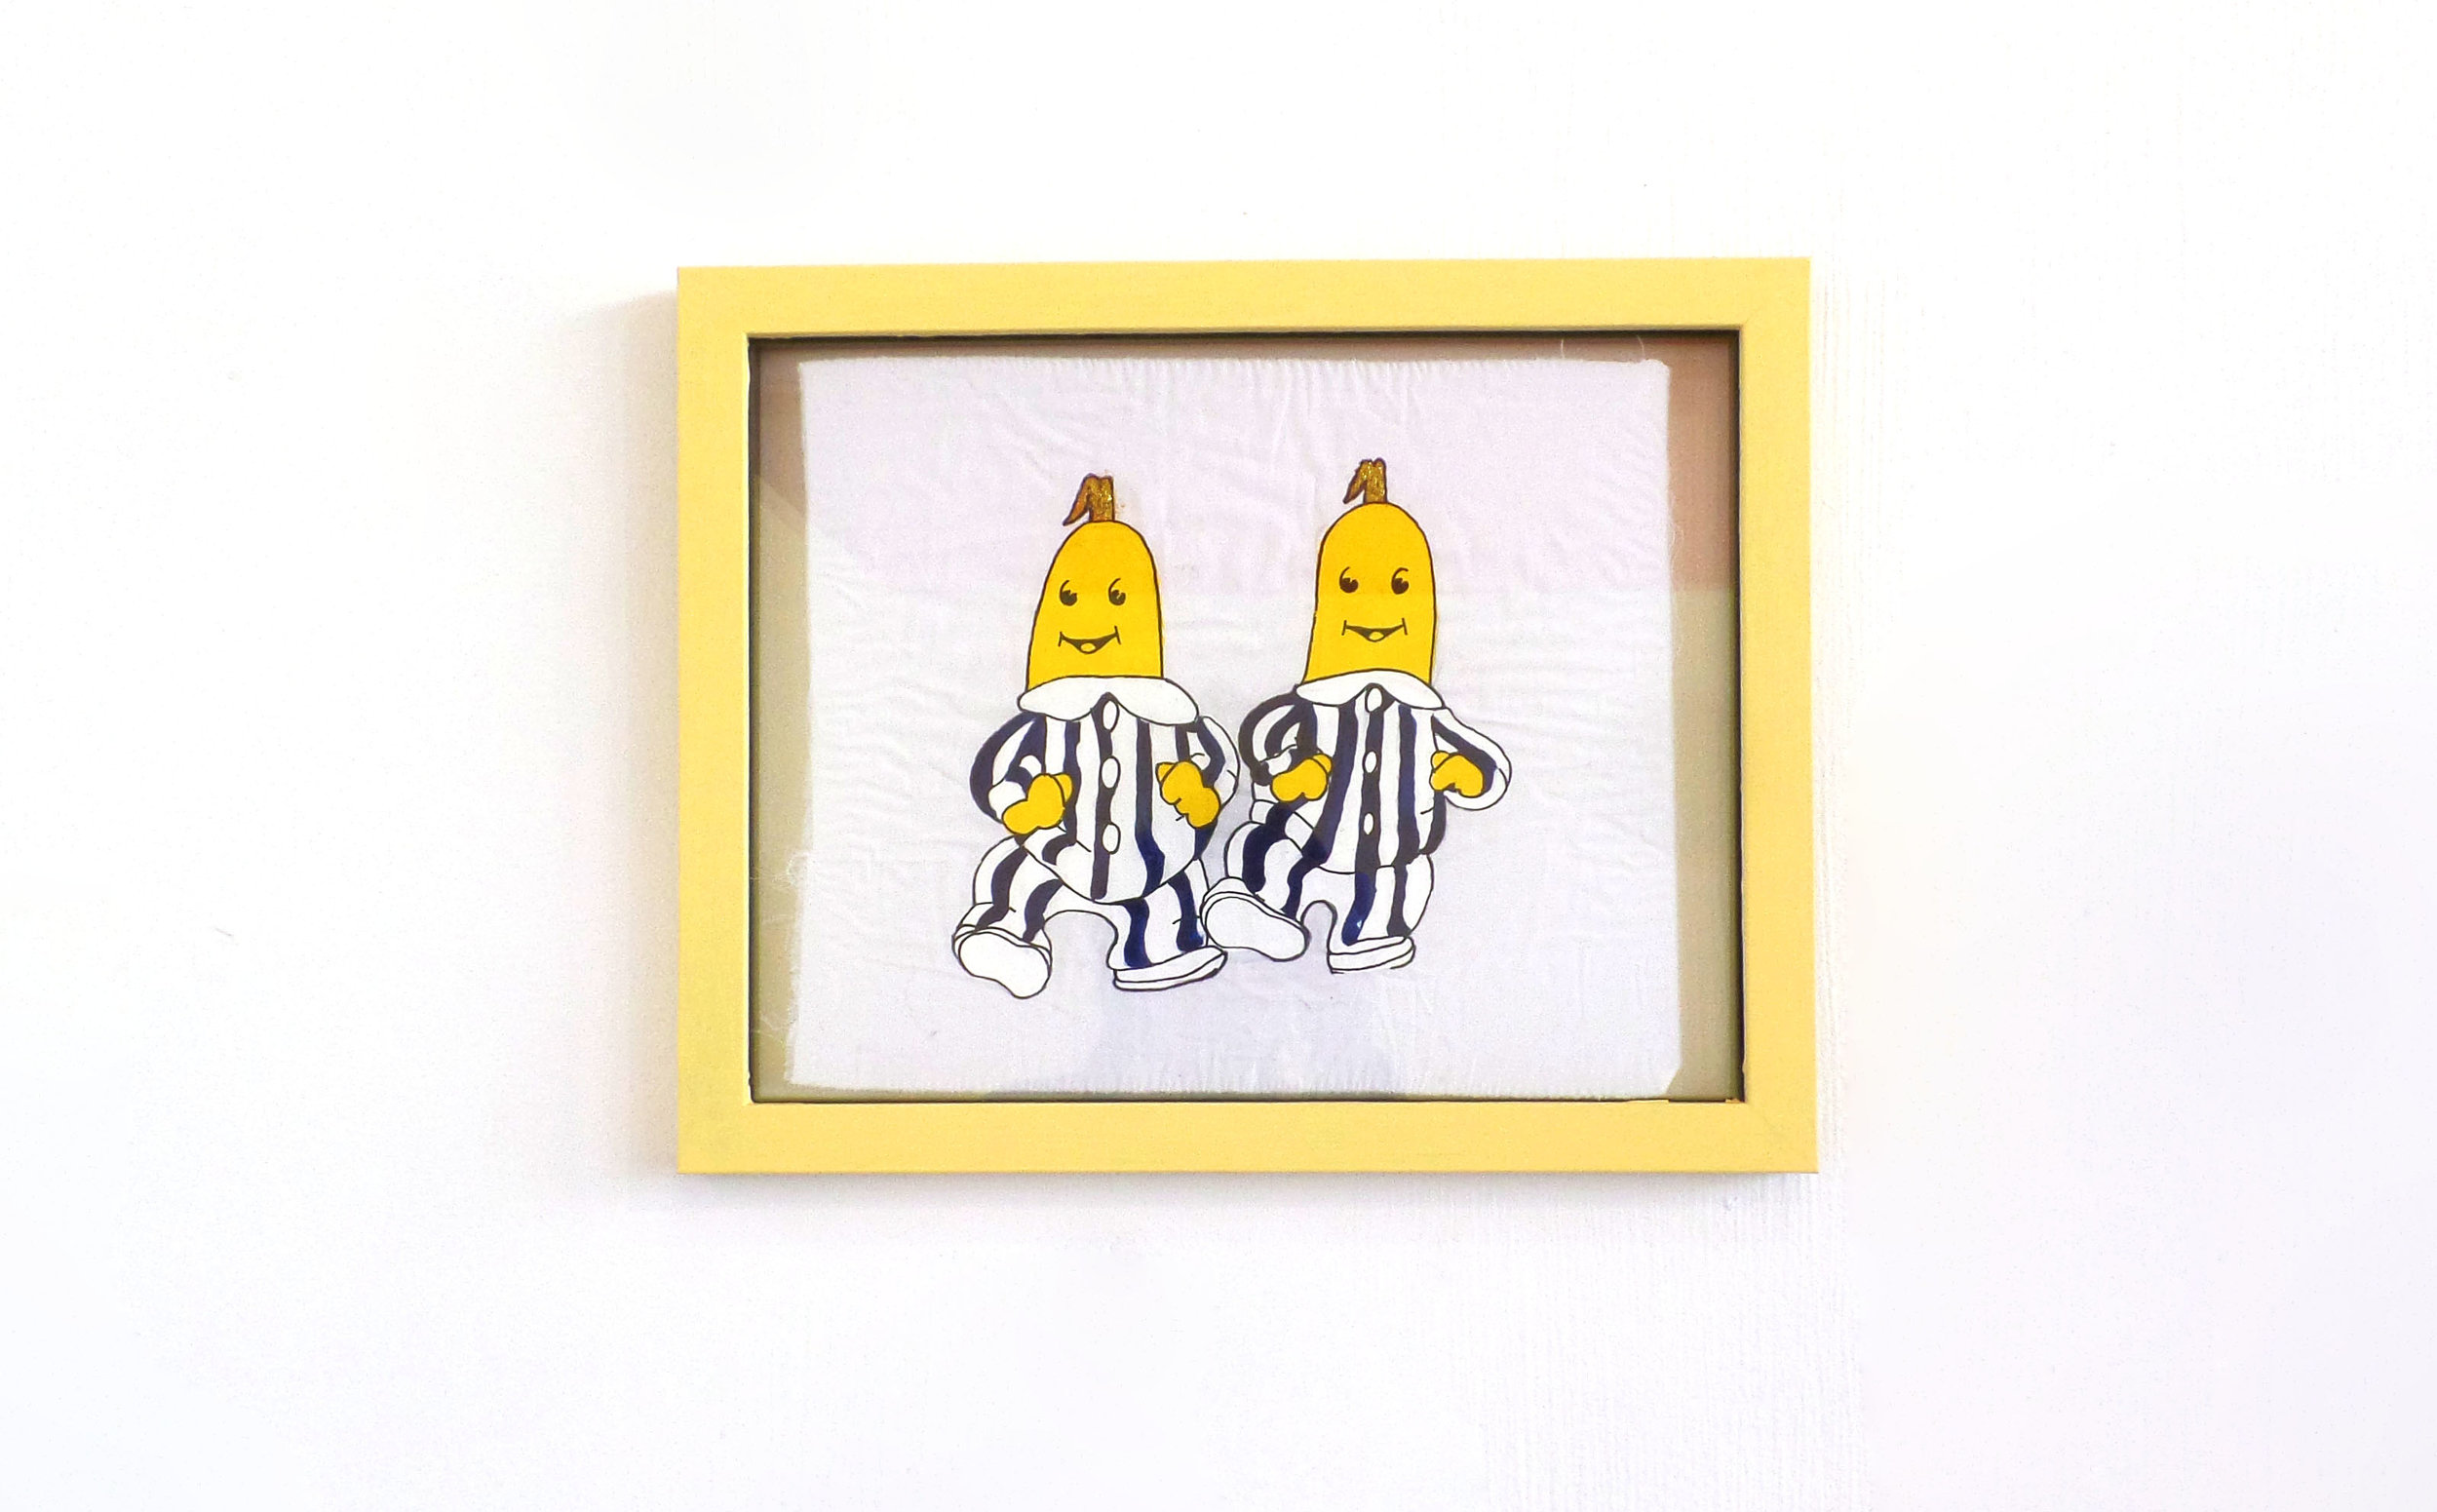  Best Banana For Life (BBFL), 2017  Collaboration with Luke O’Donnell  cotton, glitter, marker    Photo: Hana Hoogedeure 